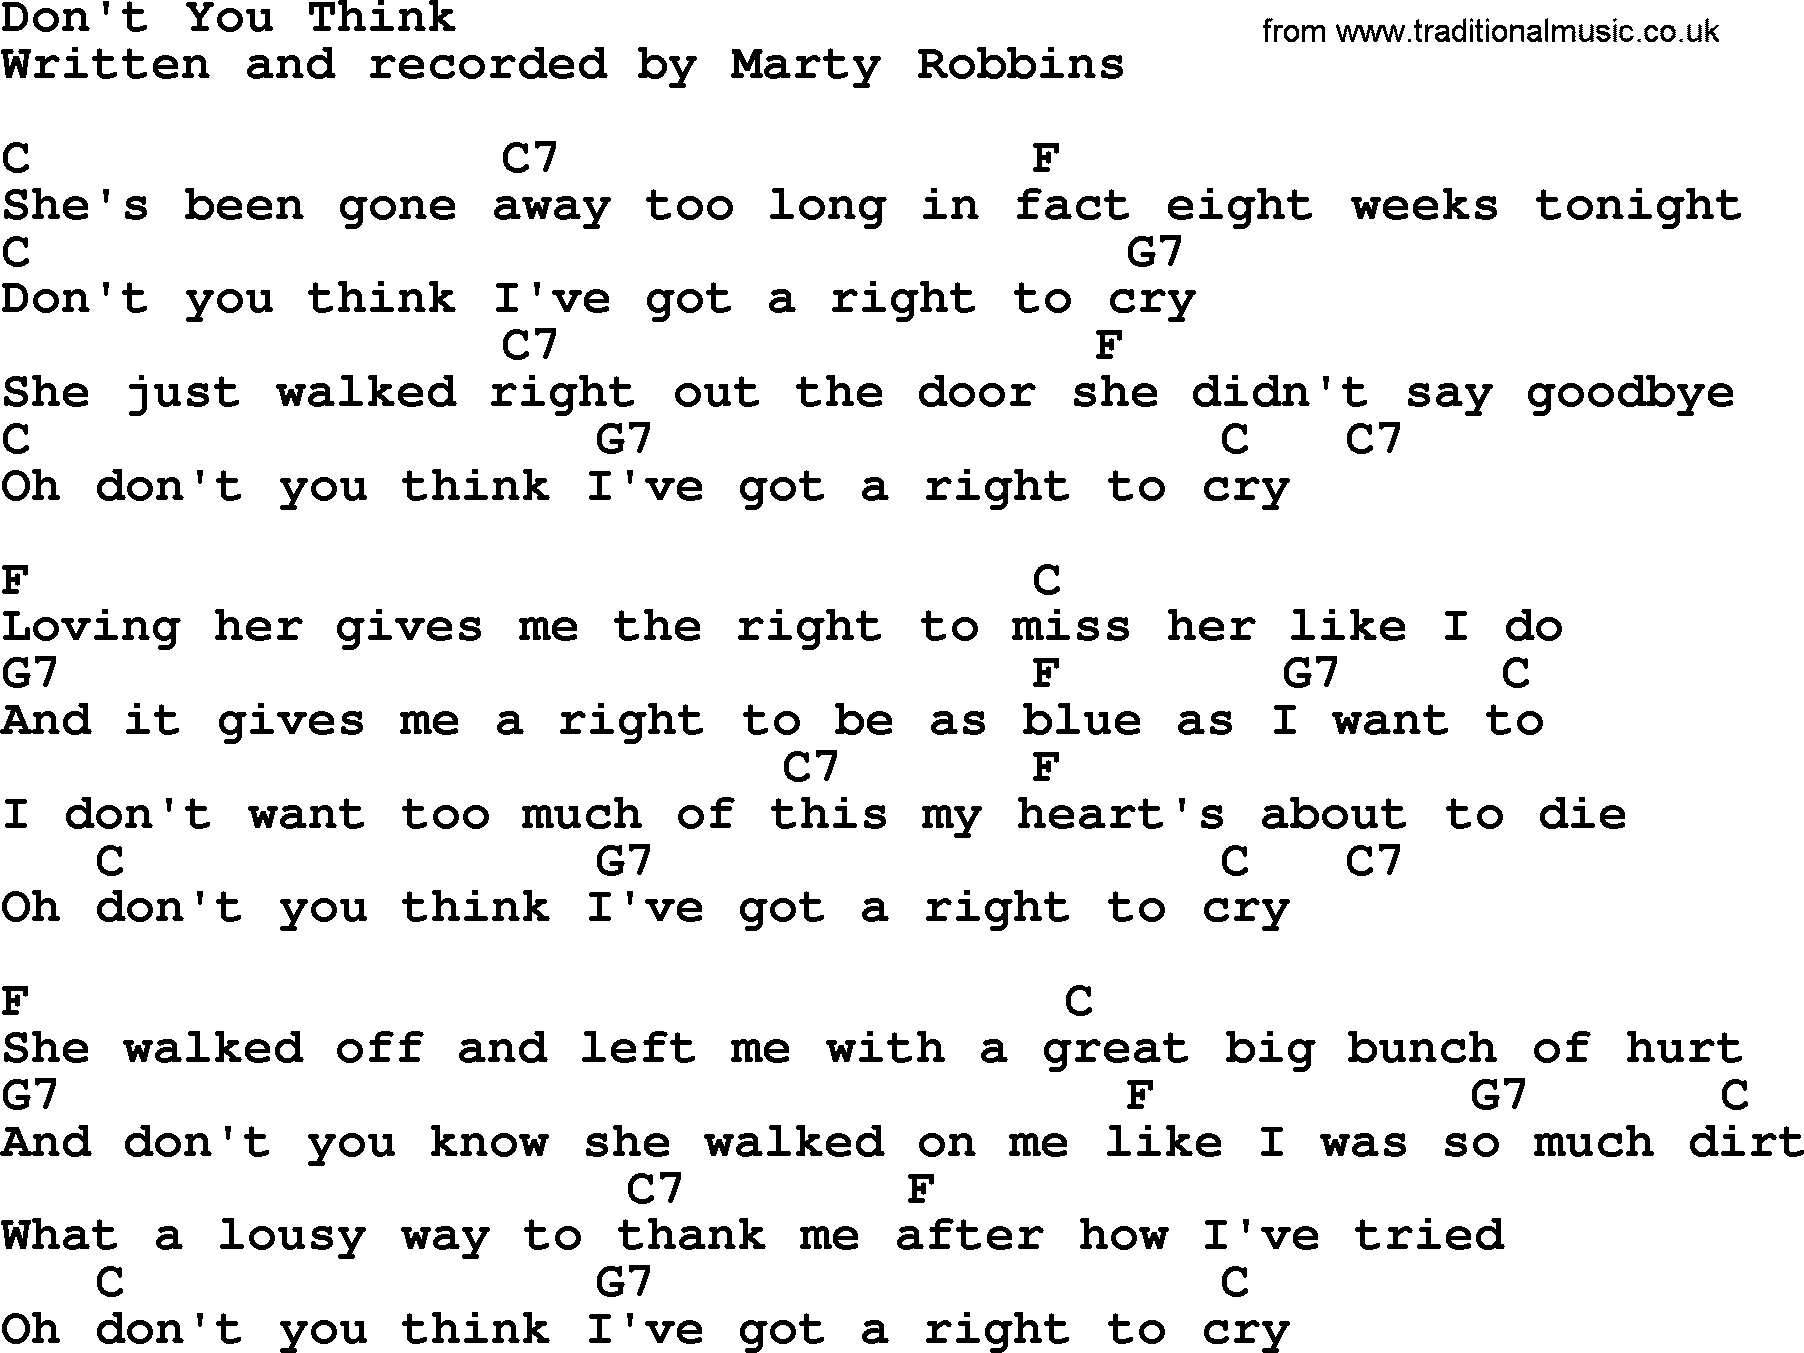 Marty Robbins song: Don't You Think, lyrics and chords